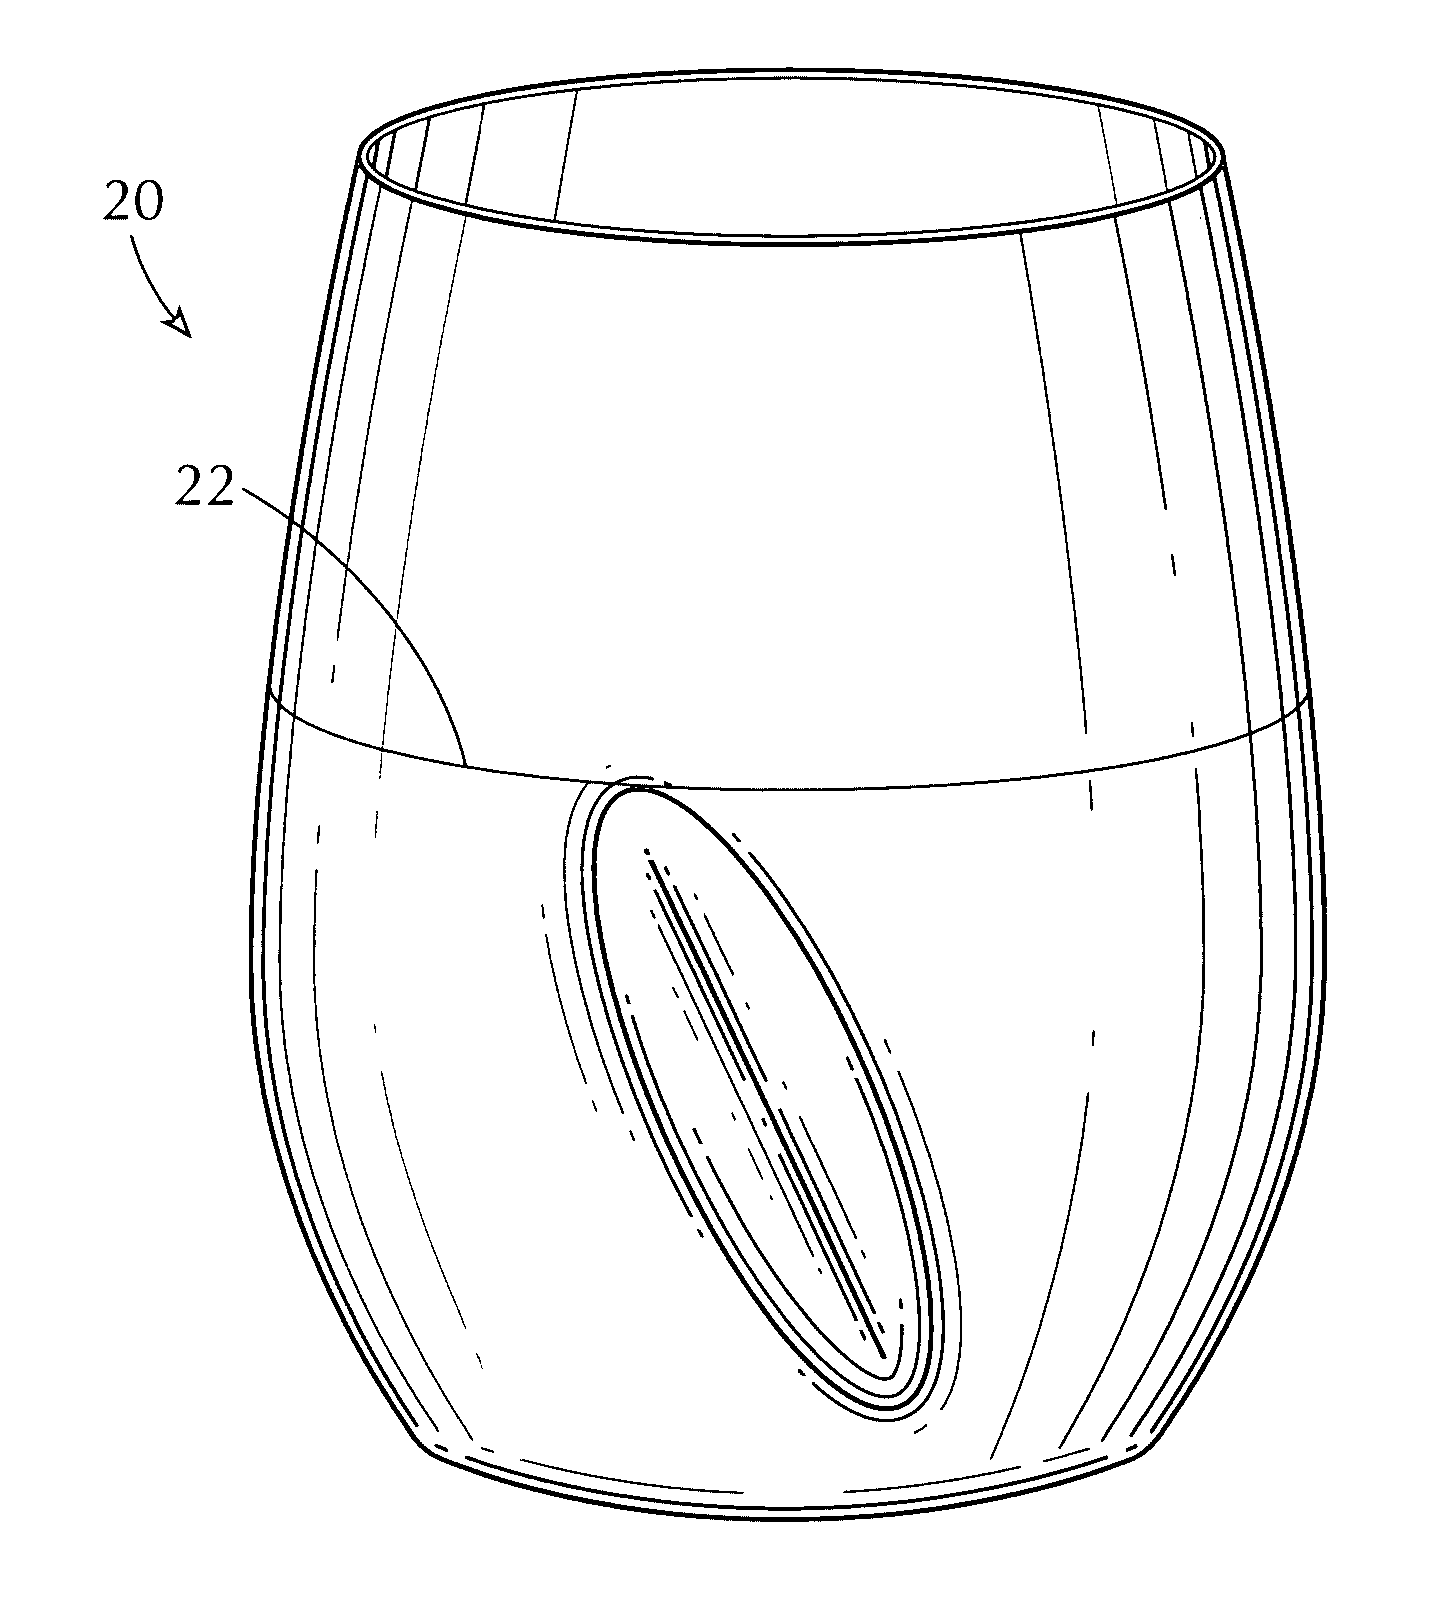 Drinking glass for containing wine and for optimizing air mixed into the wine during swirling to enhance bouquet